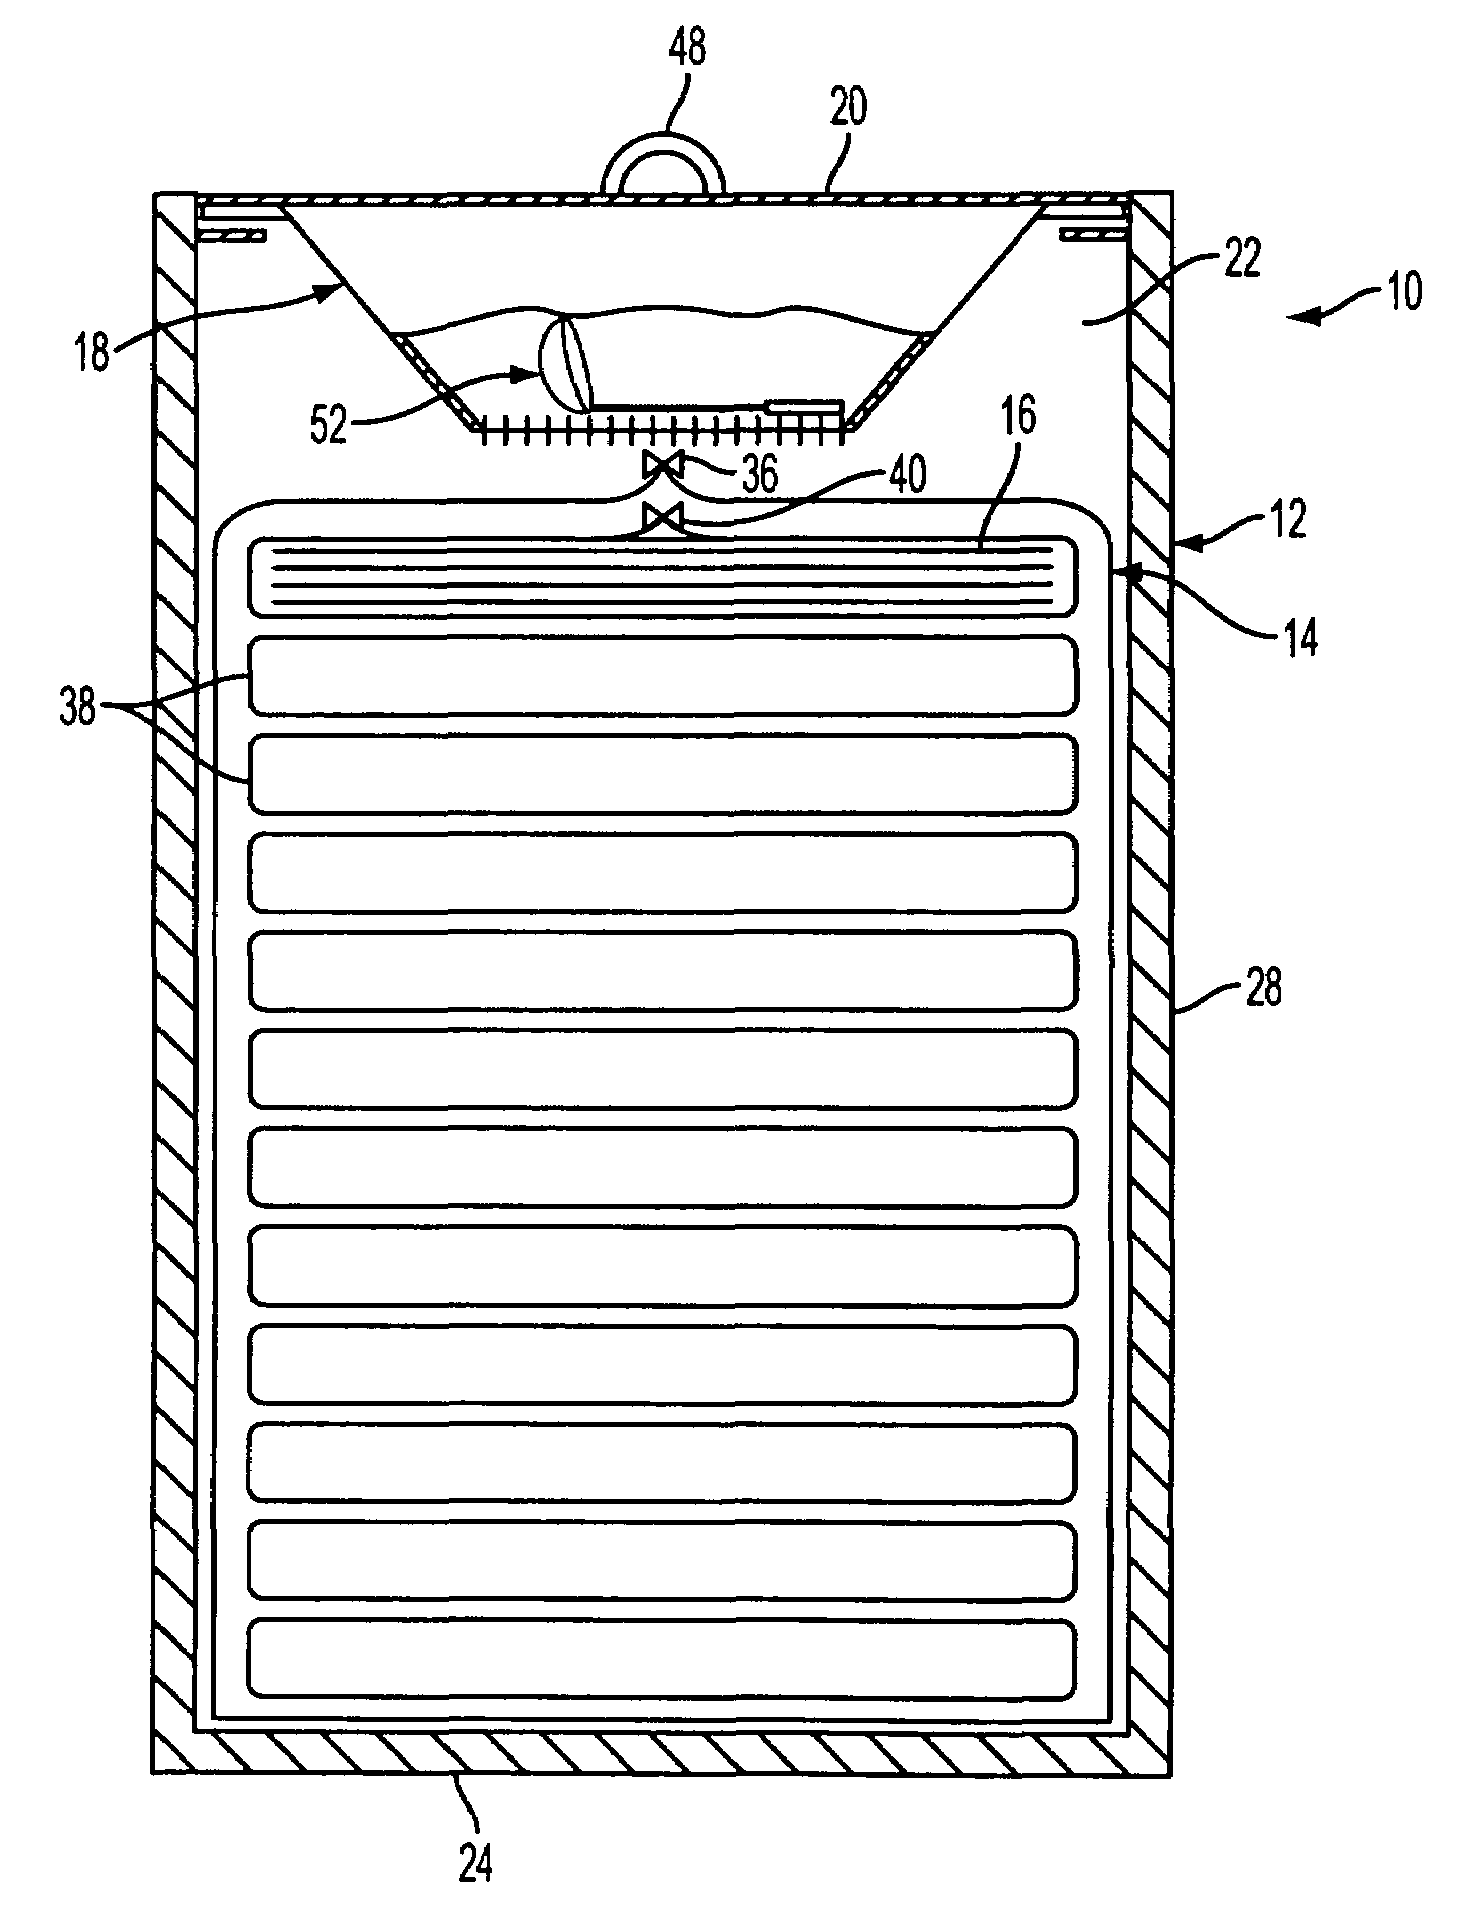 Point-of-use water treatment assembly